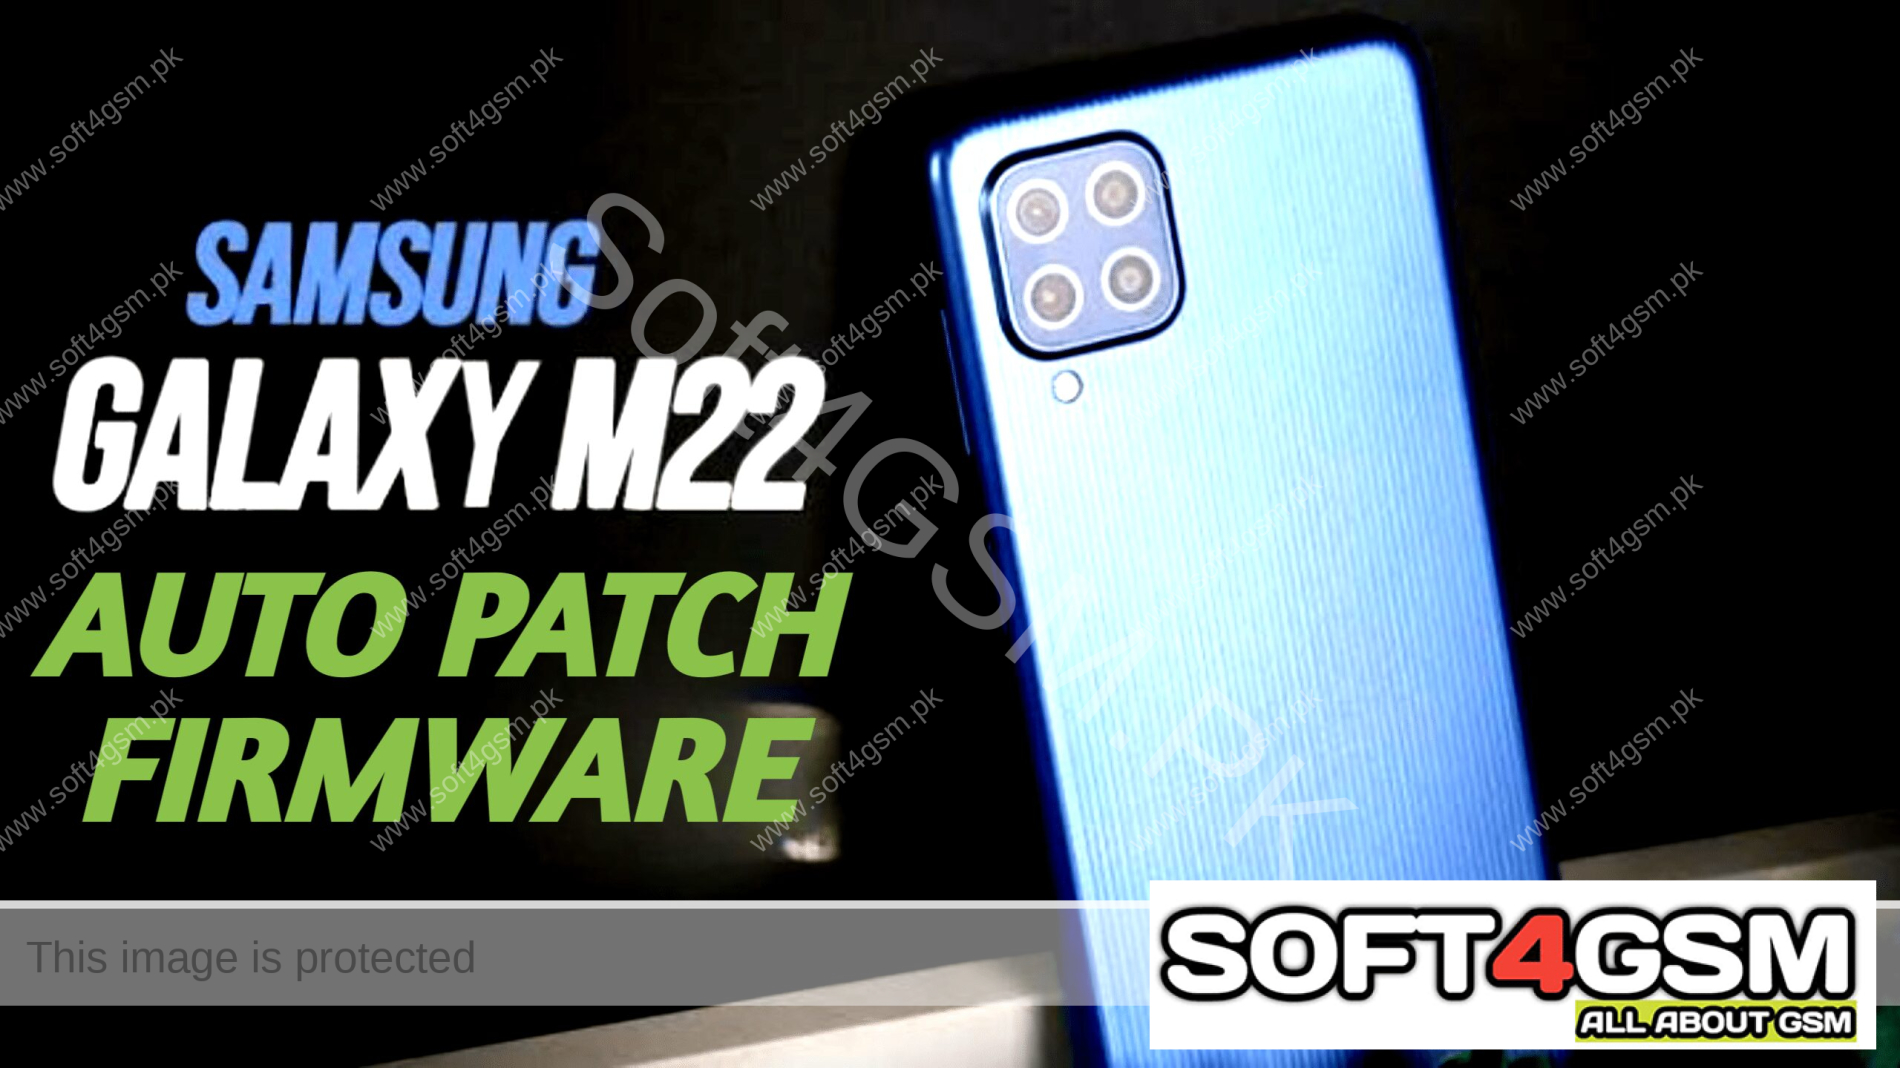 Samsung Galaxy M22 SM-M225FV BIT 3 Auto Patch Root Firmware Auto Call Recorder BY SOFT4GSM.PK